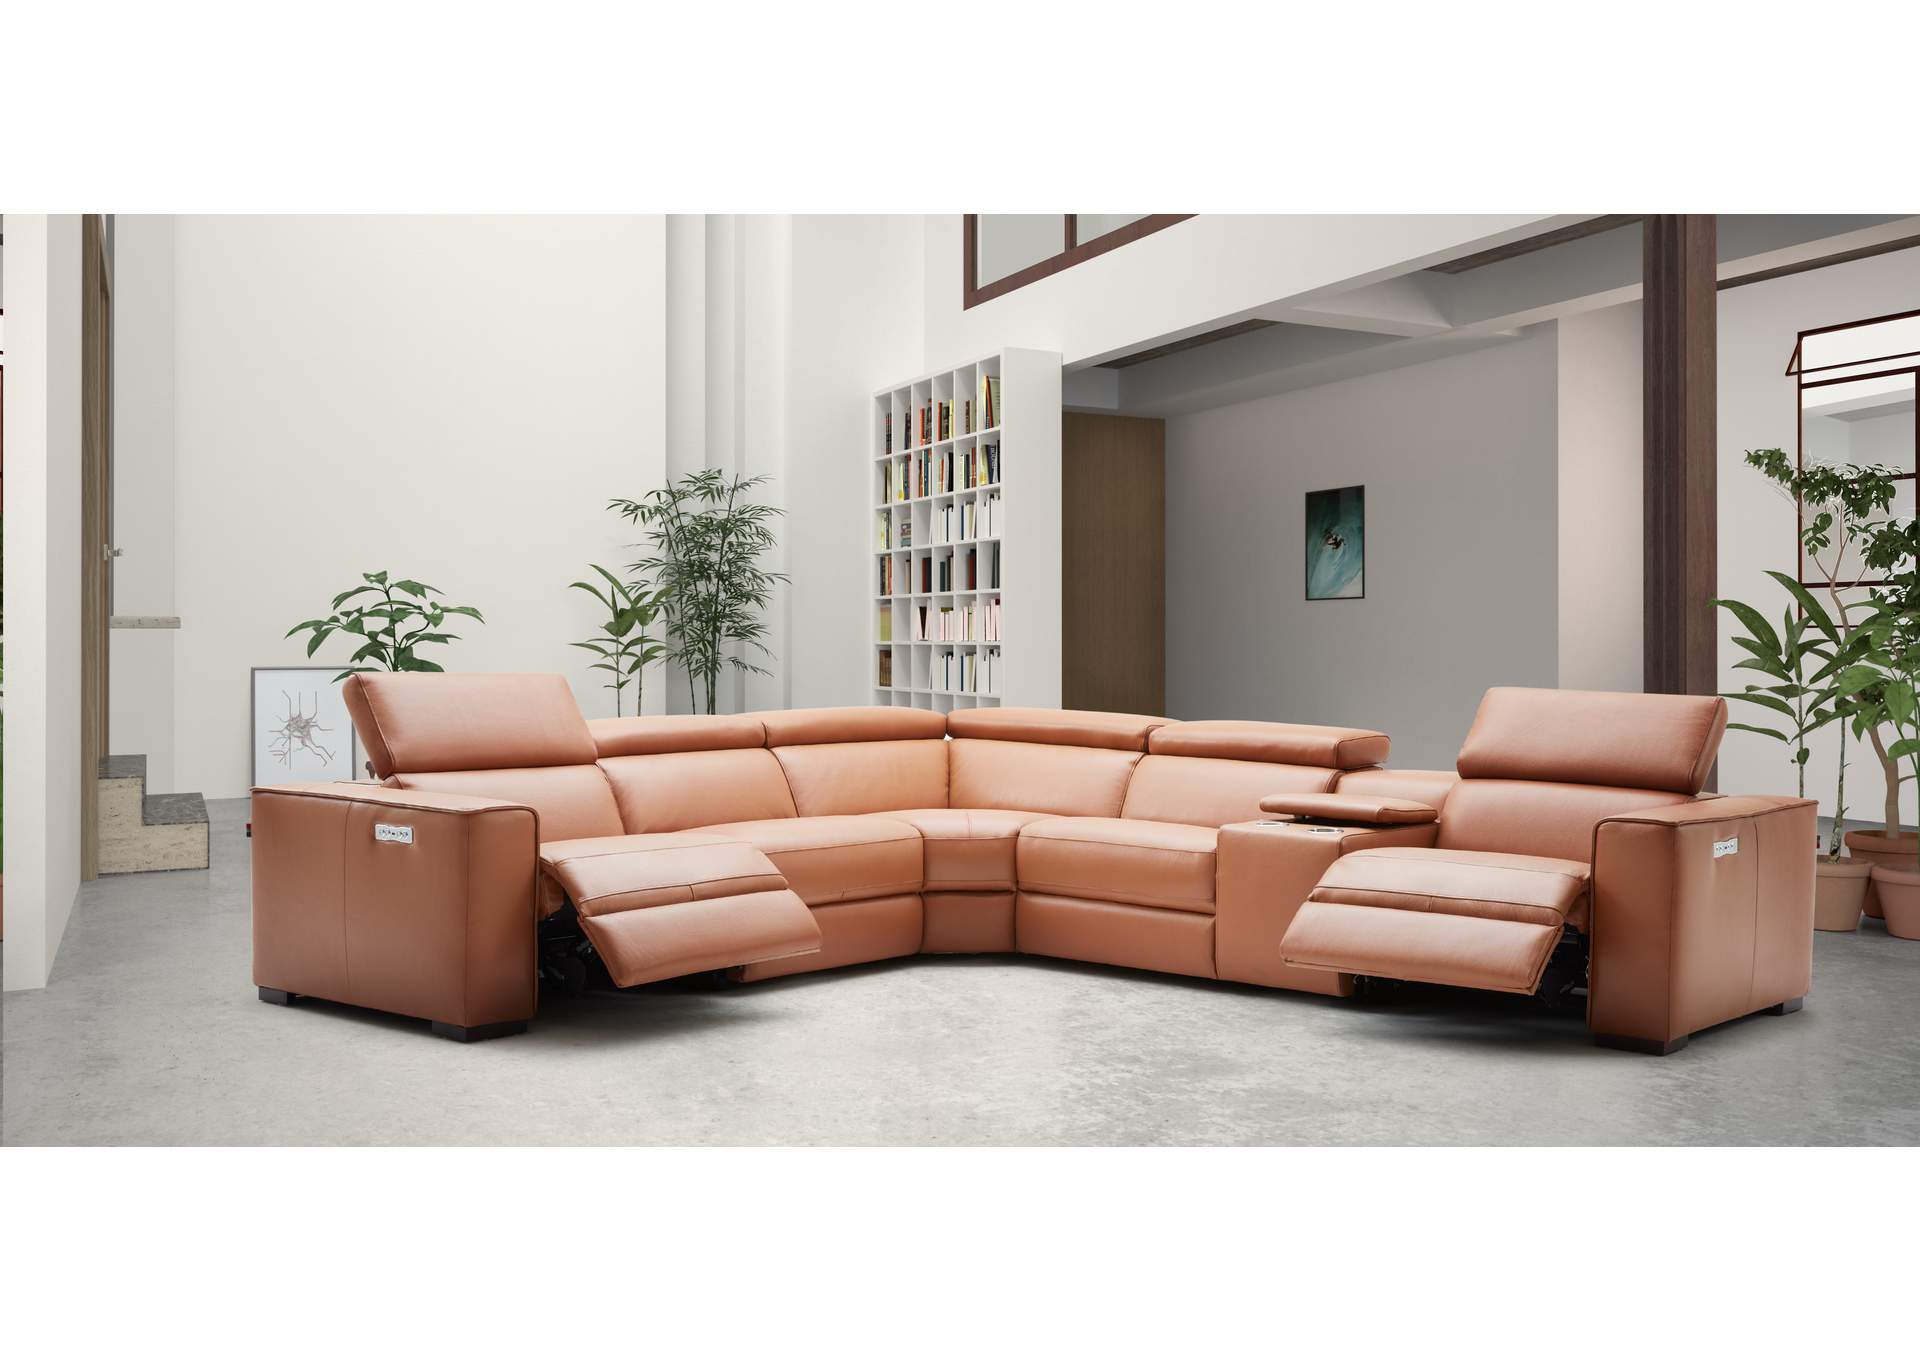 Picasso Motion Sectional In Caramel,J&M Furniture